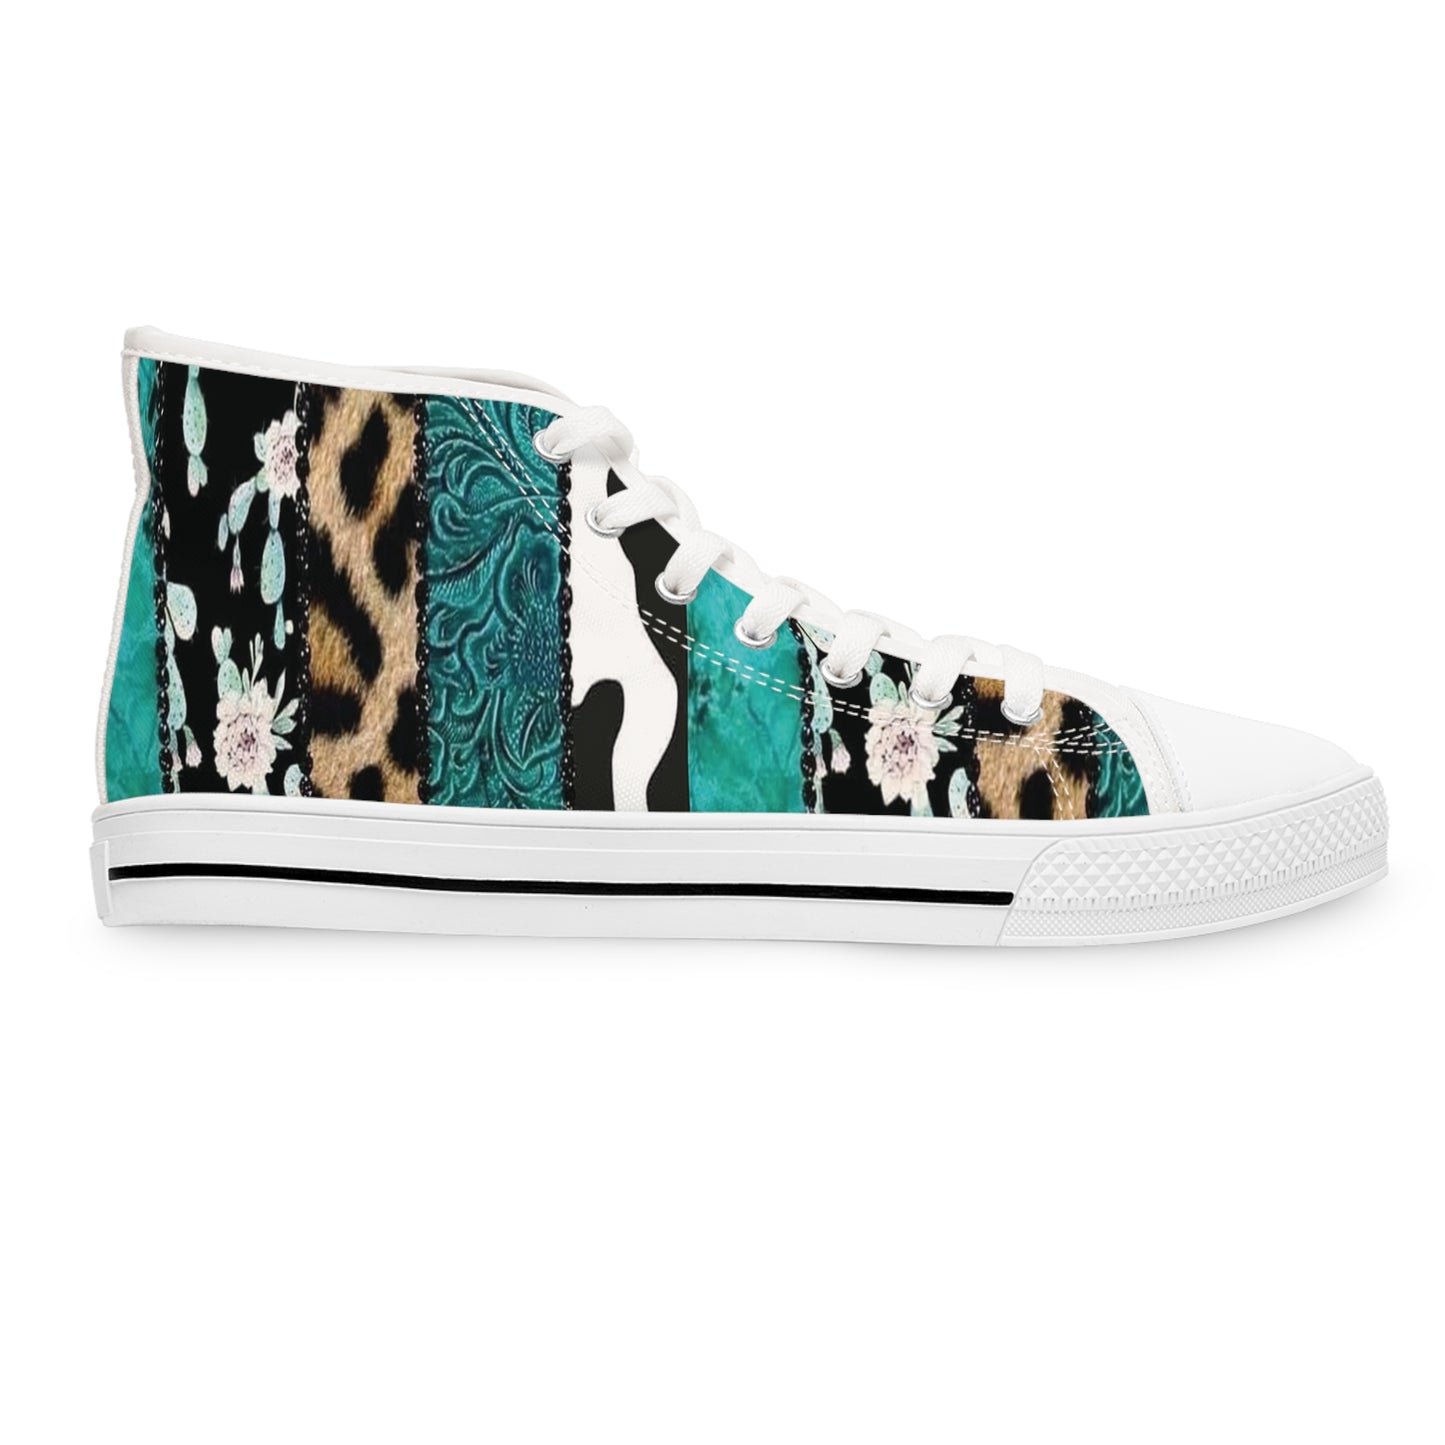 Turquoise, Floral, Cheetah, Faux Leather, and Cowhide Ladies High-Top Sneakers, Livestock Show Shoes